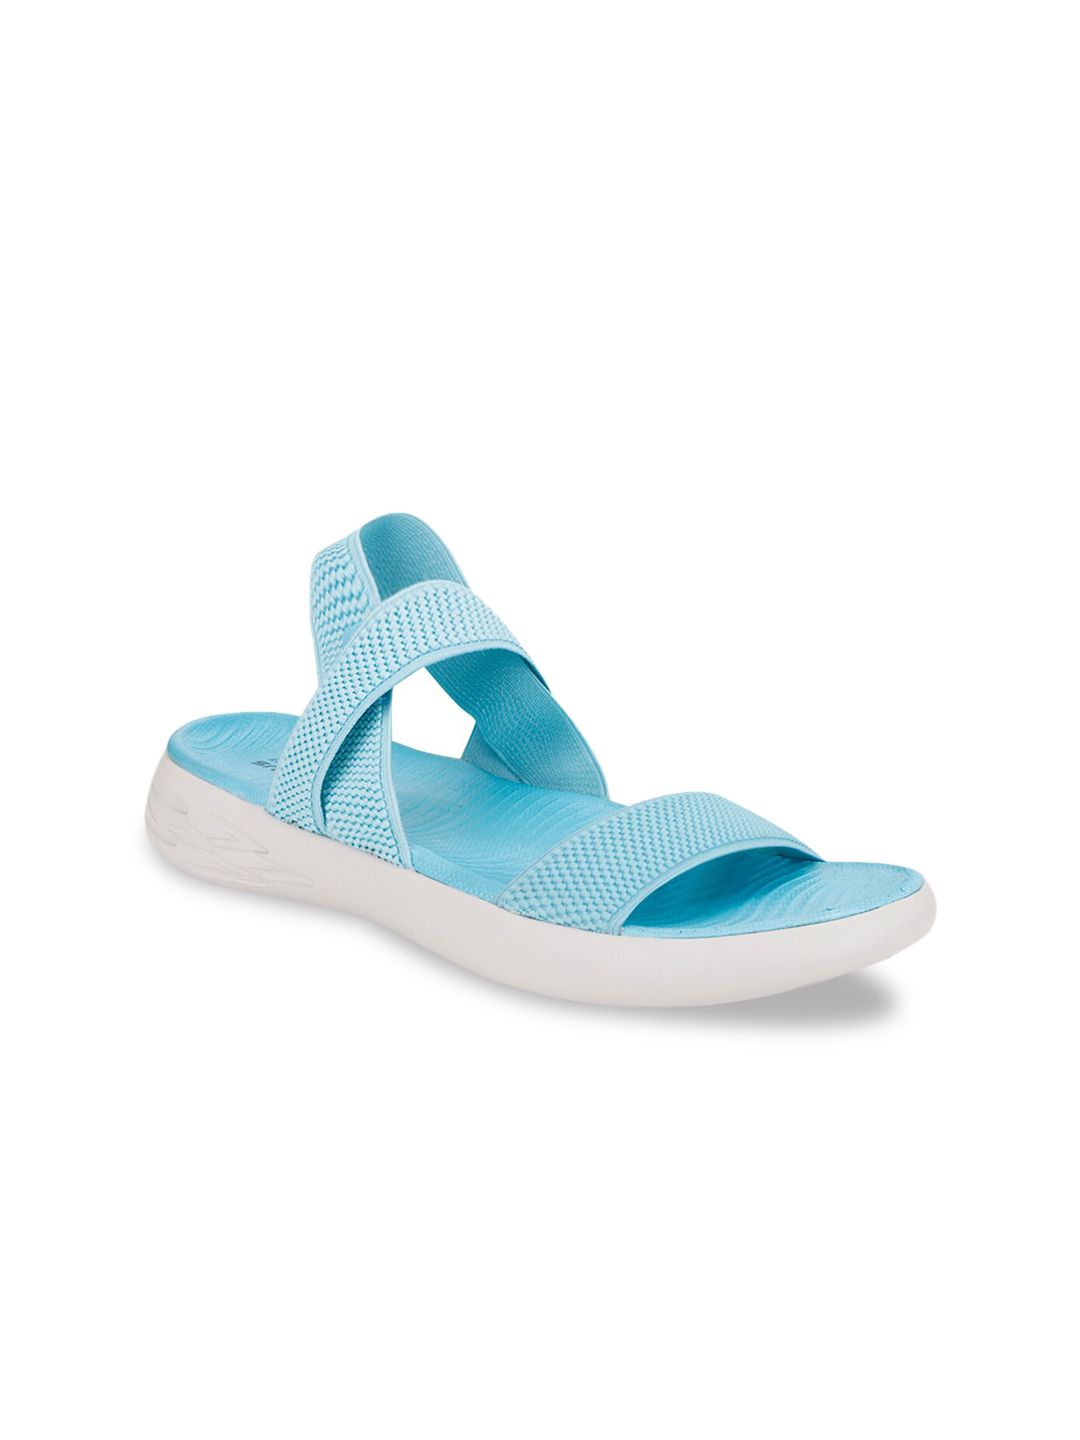 Campus Women Blue & White Sports Sandals Price in India